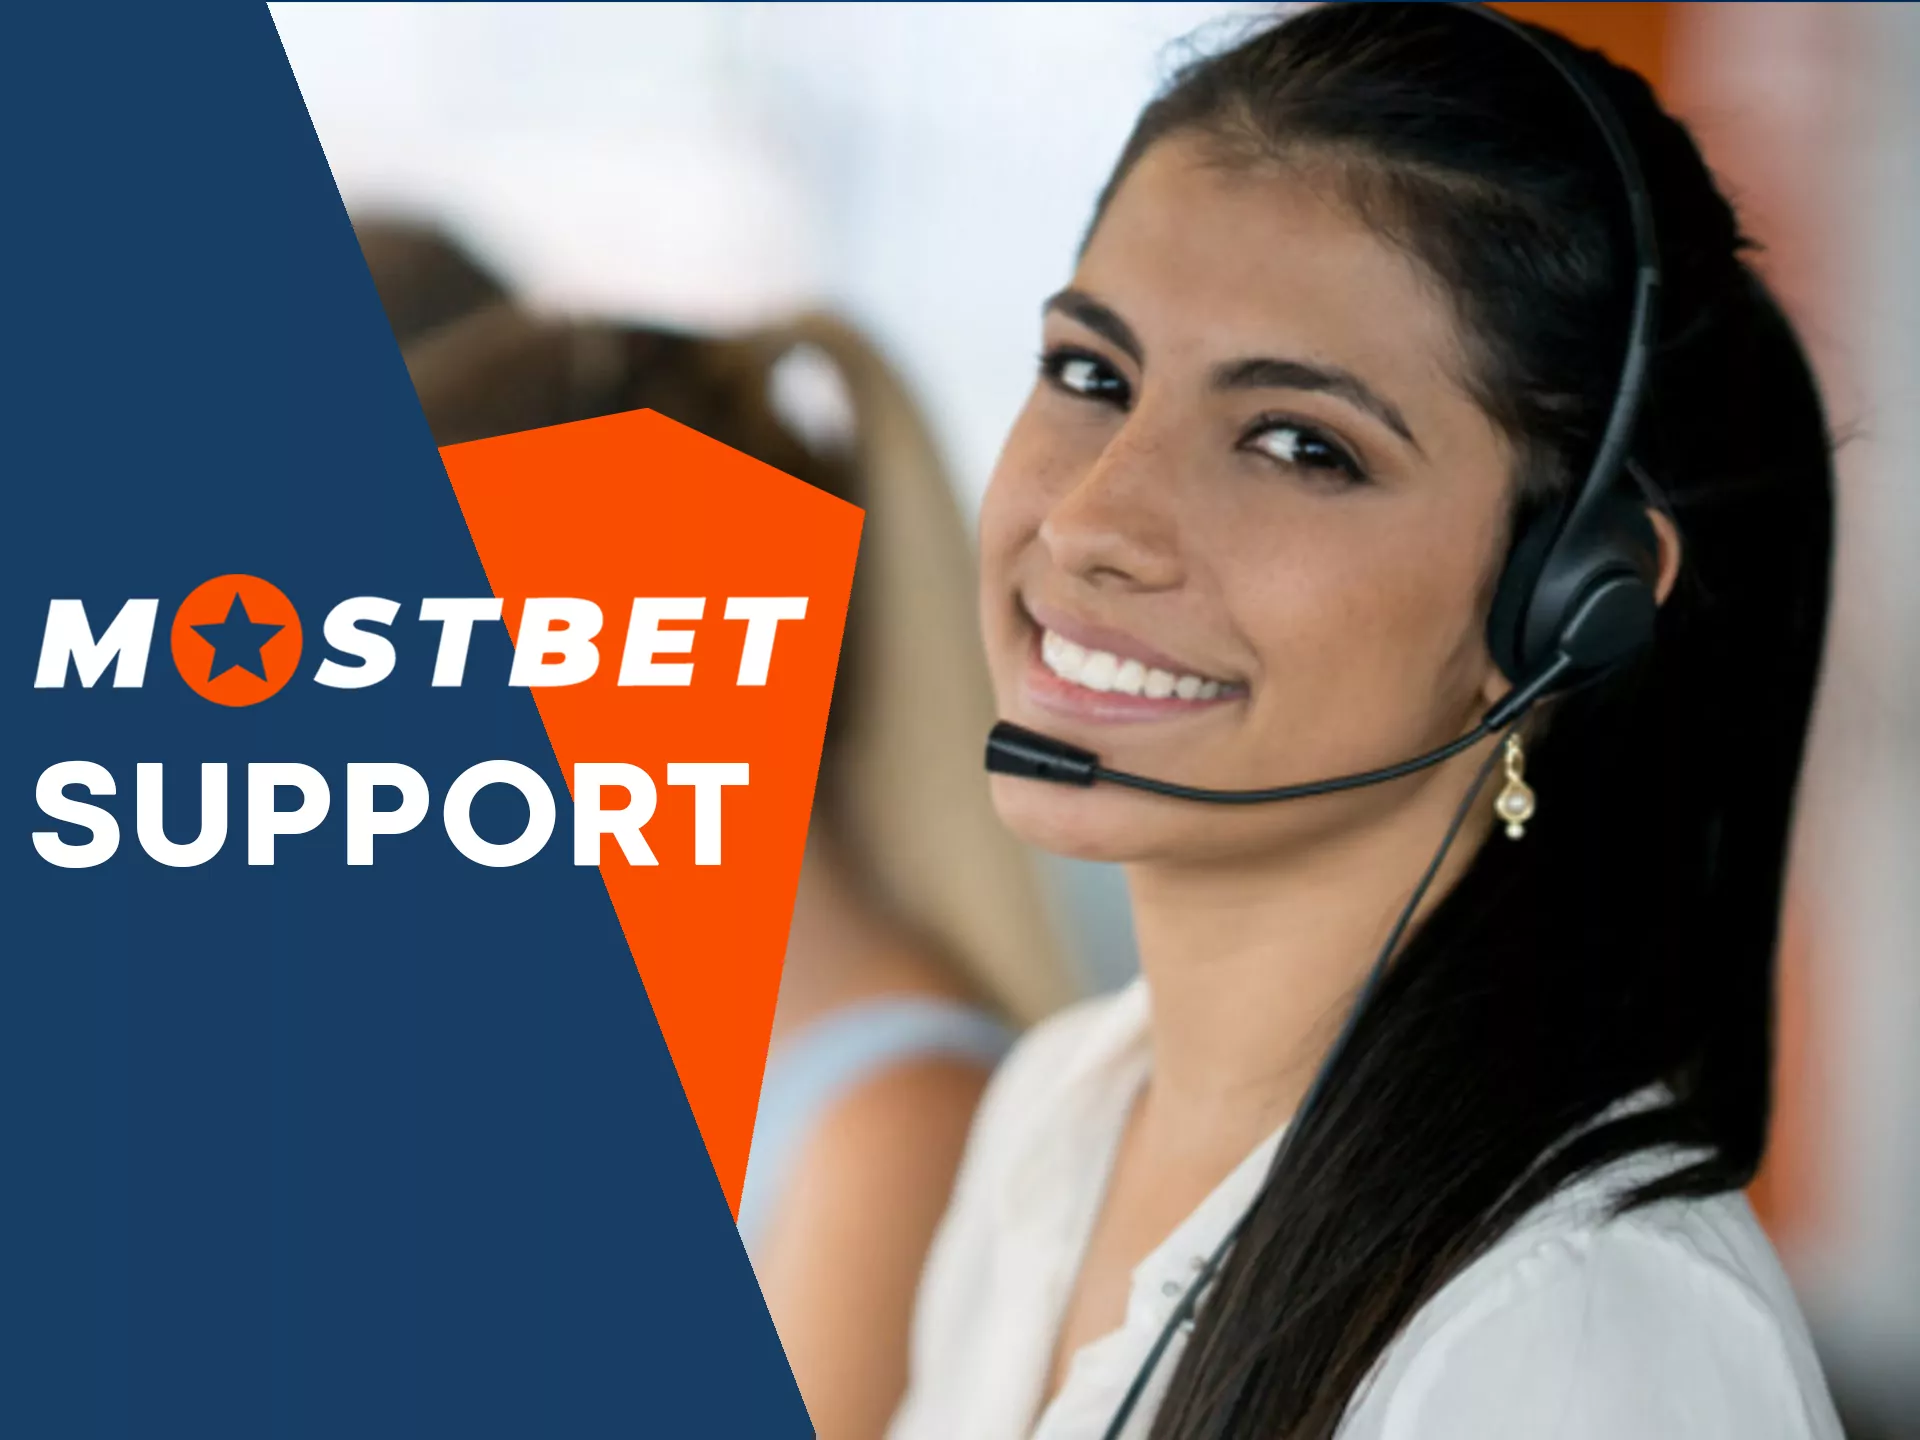 Call Mostbet support if you have questions.